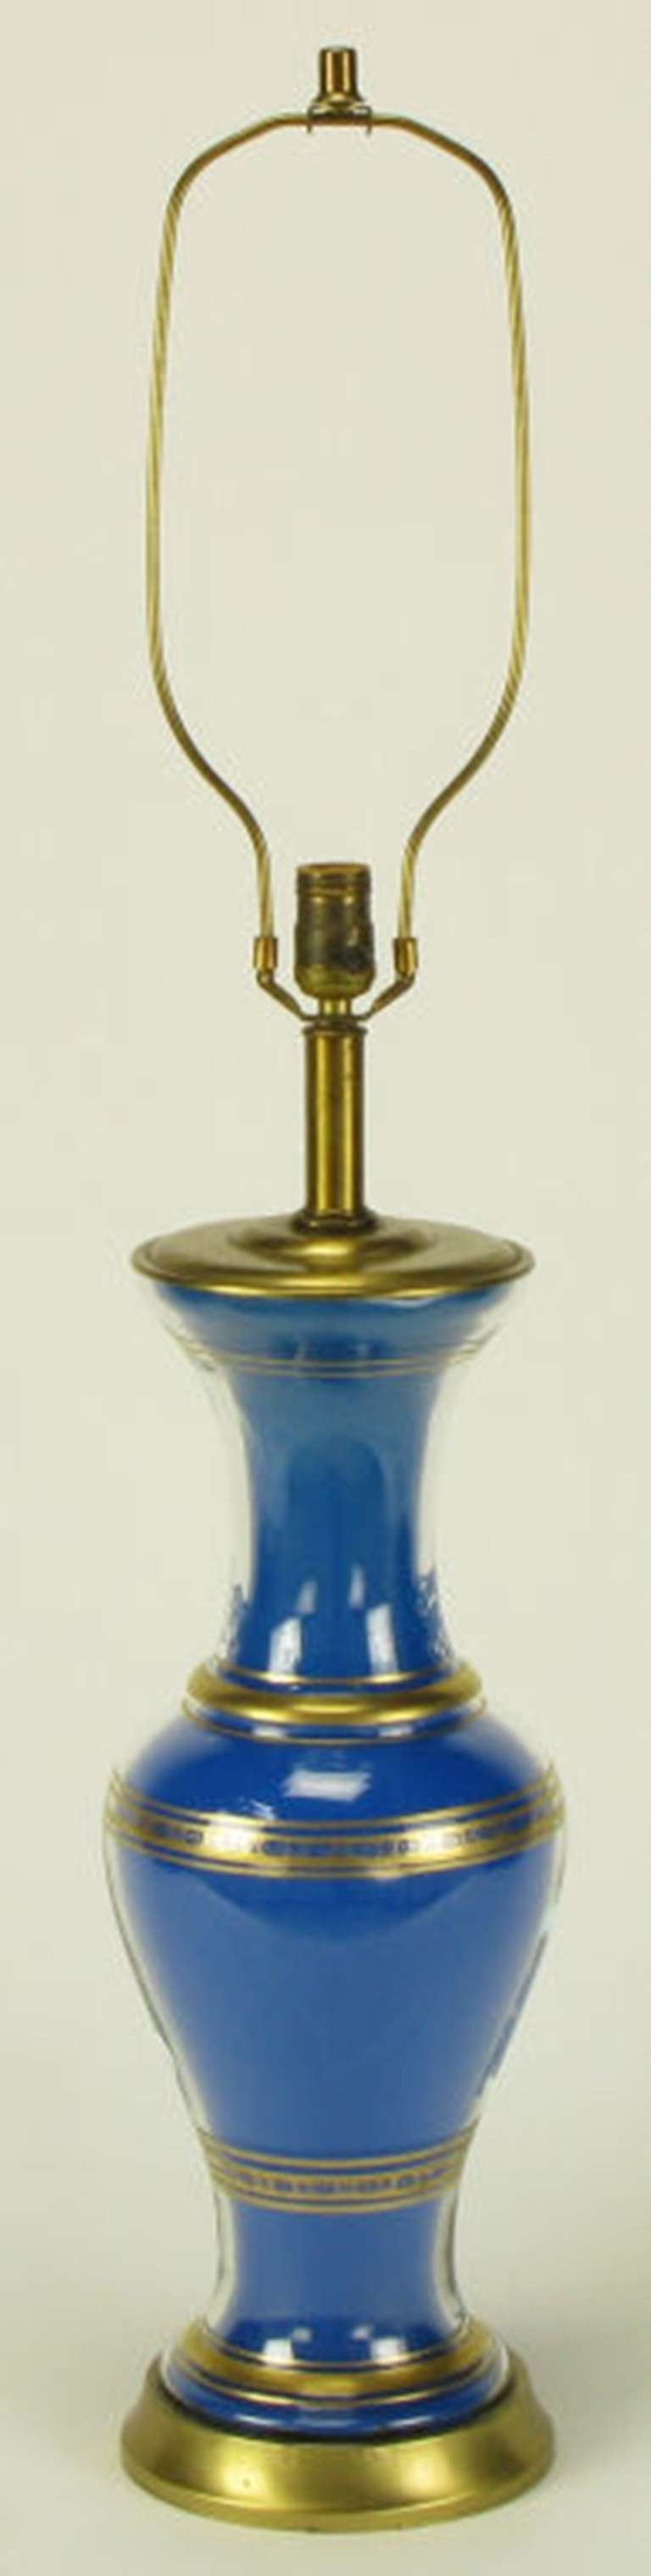 Pair of Frederick Cooper vase form glass table lamps with royal blue reverse inserts. Gilt detailing with brushed brass base, cap and stem. Brass socket and harp, signed and rewired.